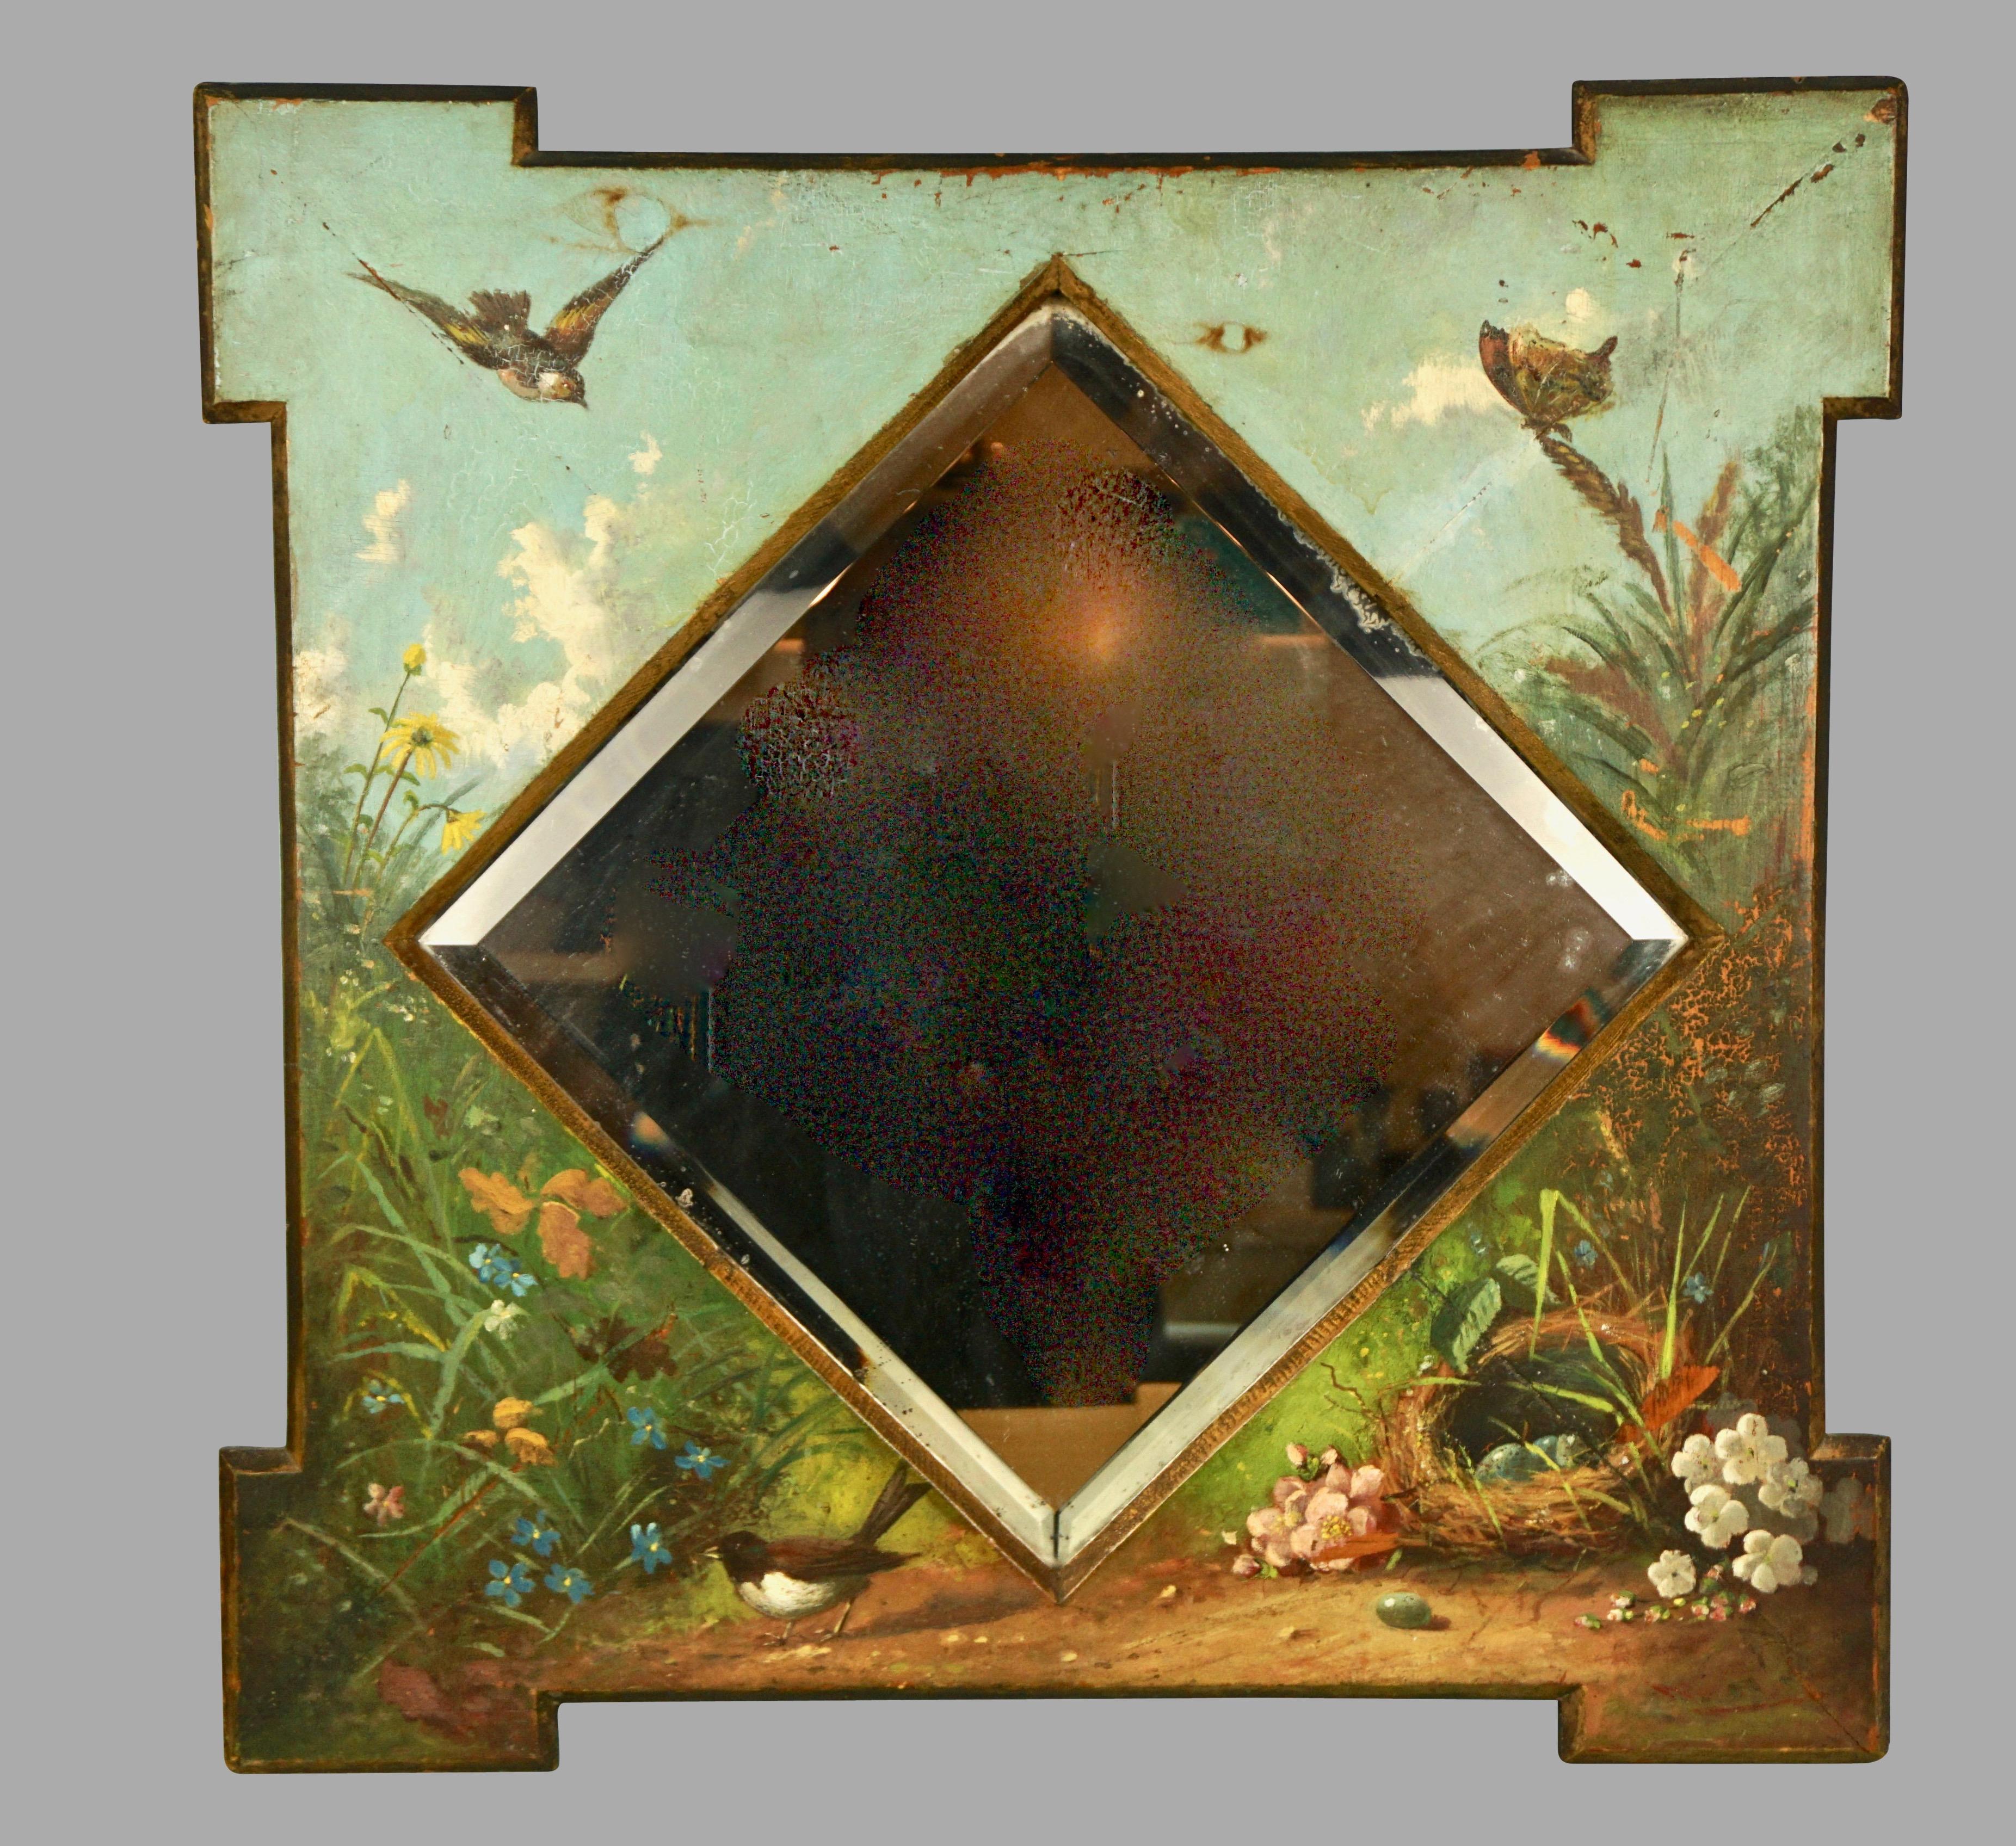 A charming American Victorian mirror, the original centered beveled glass mirror plate surrounded by well-painted images of nesting and flying small birds, butterflies and various wildflowers. The overall composition, a verdant garden scene with a